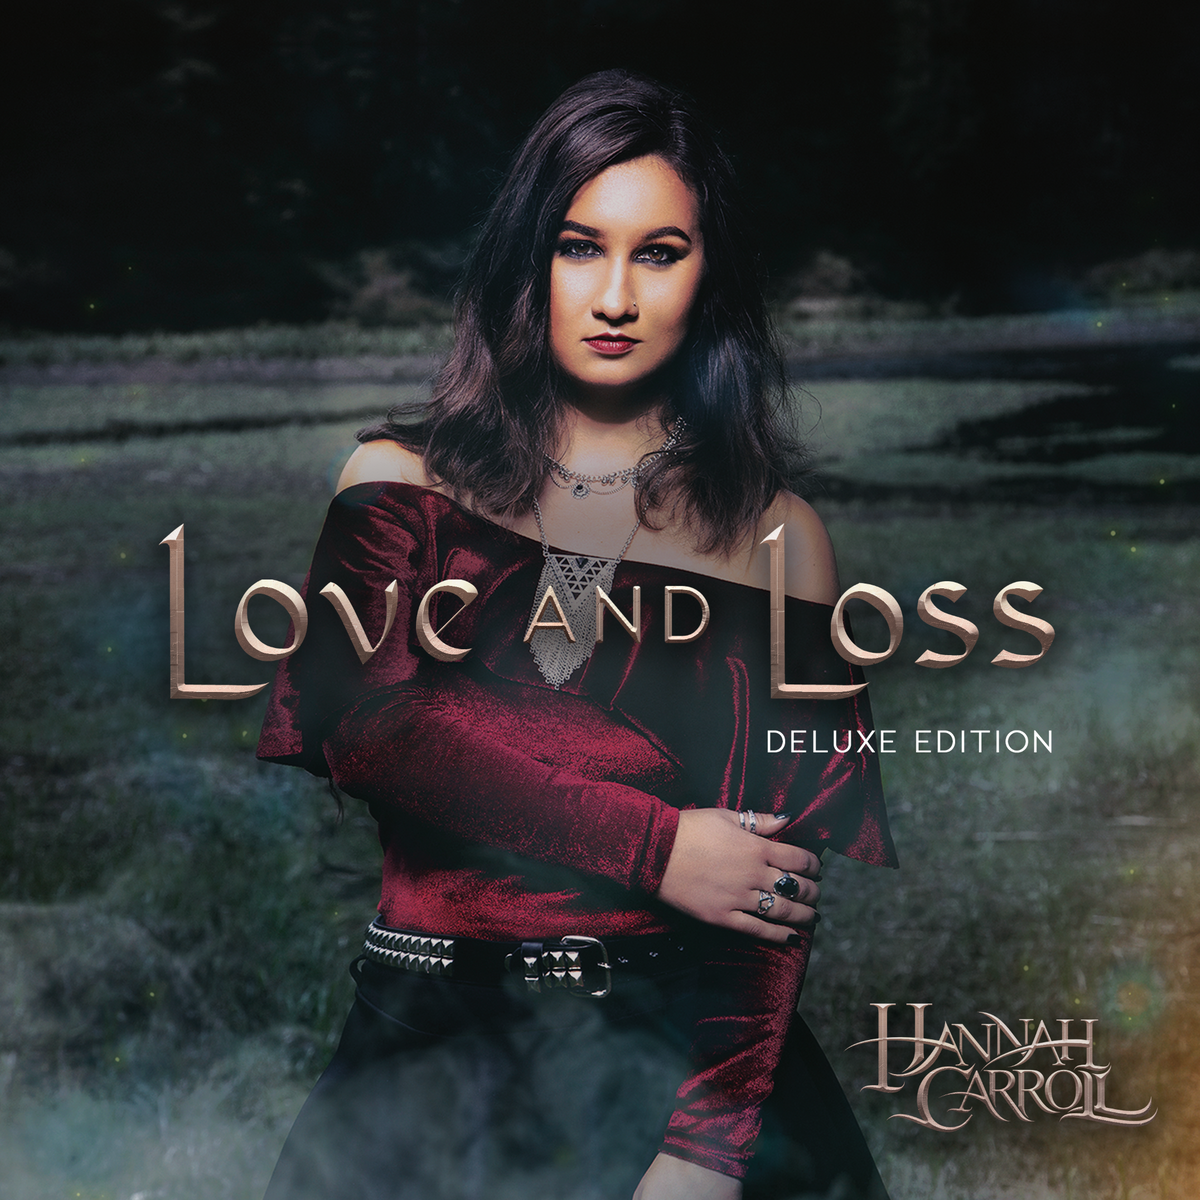 Love and Loss deluxe cover of Hannah Carroll in red blouse, black skirt, and gothic jewelry standing in green grass